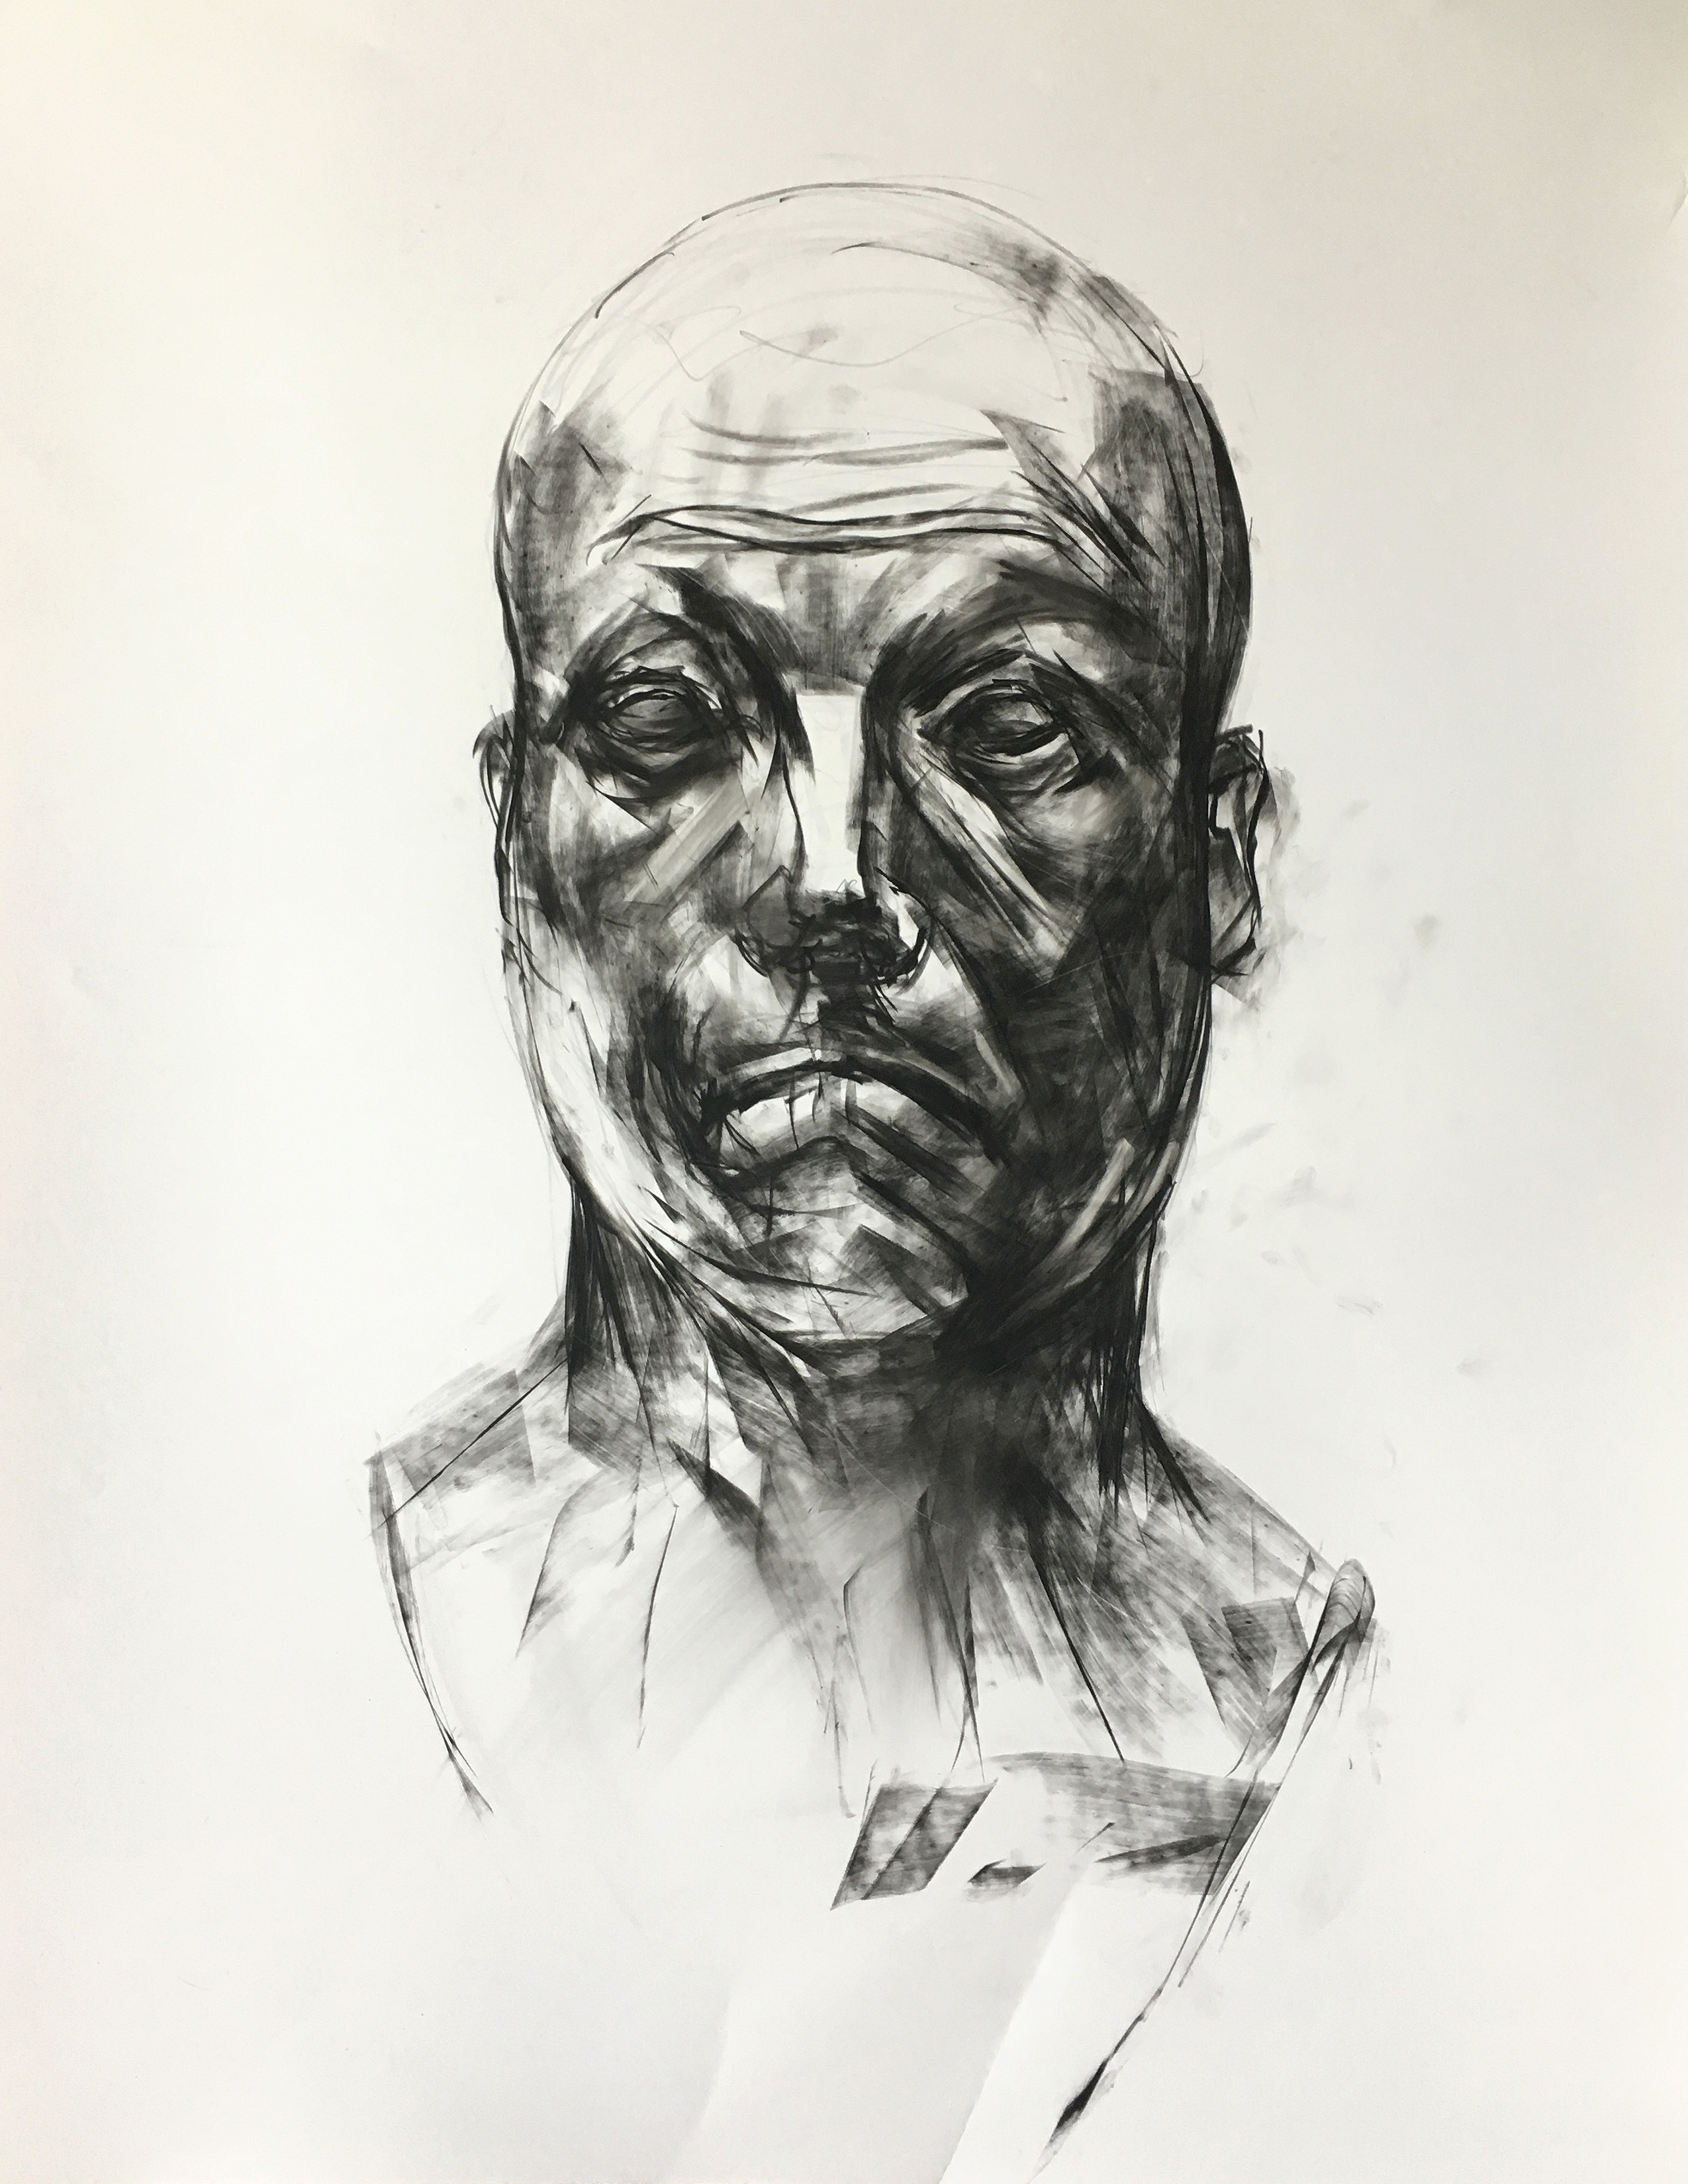 7 Drawings and 3 Stories about Franz Xaver Messerschmidt